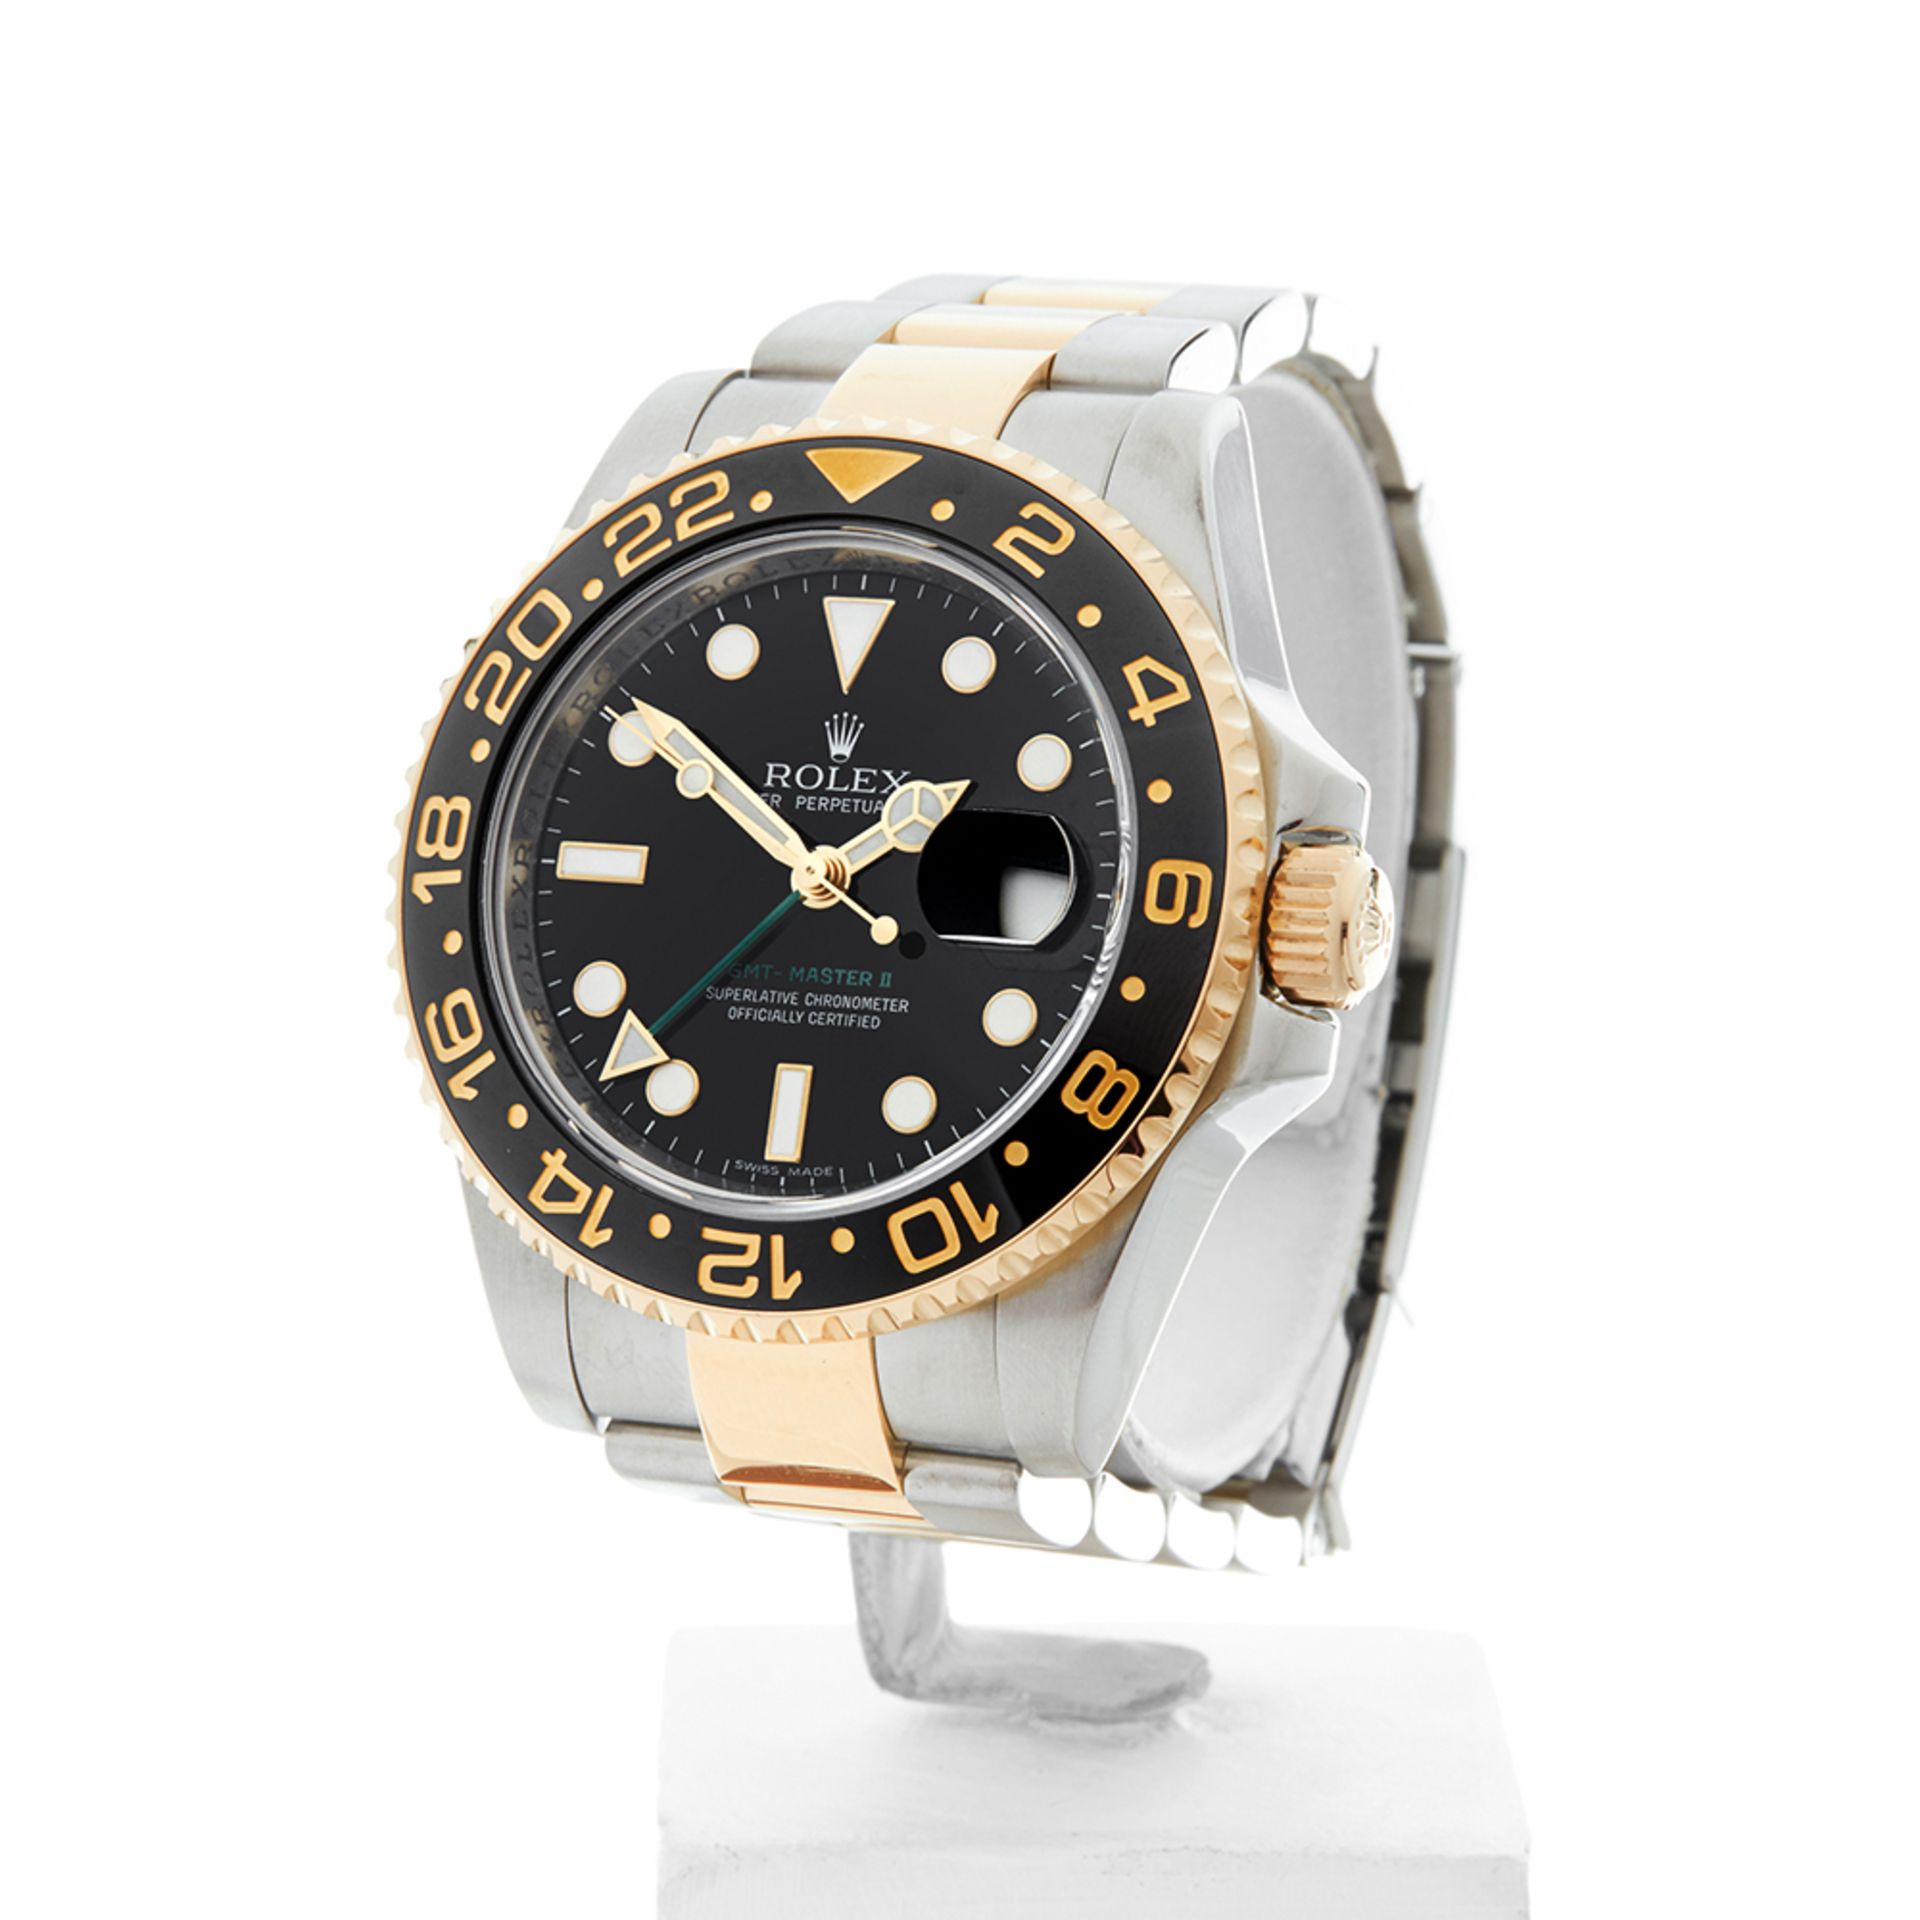 GMT-Master II 40mm Stainless Steel & 18K Yellow Gold - 116713LN - Image 3 of 9